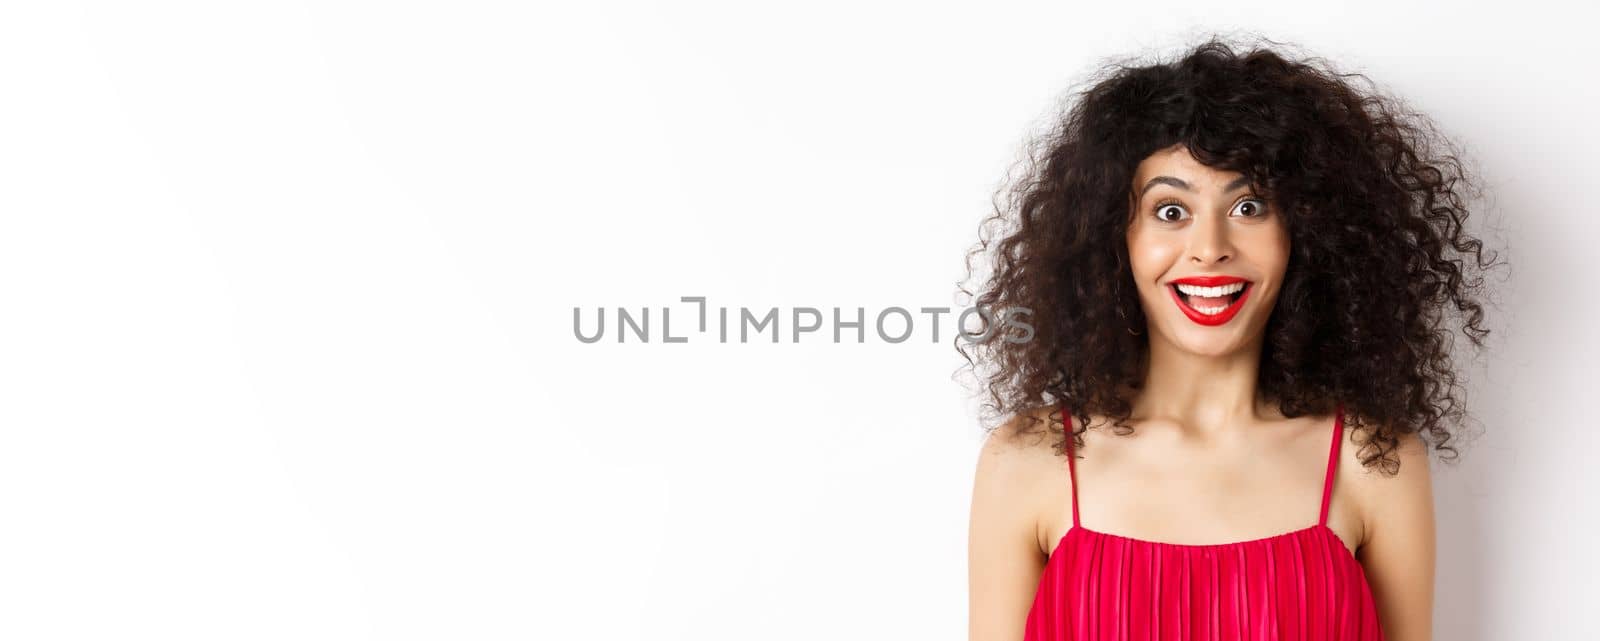 Close-up of happy lady with curly hair and red lips, raising eyebrows and looking surprised at camera, standing over white background.